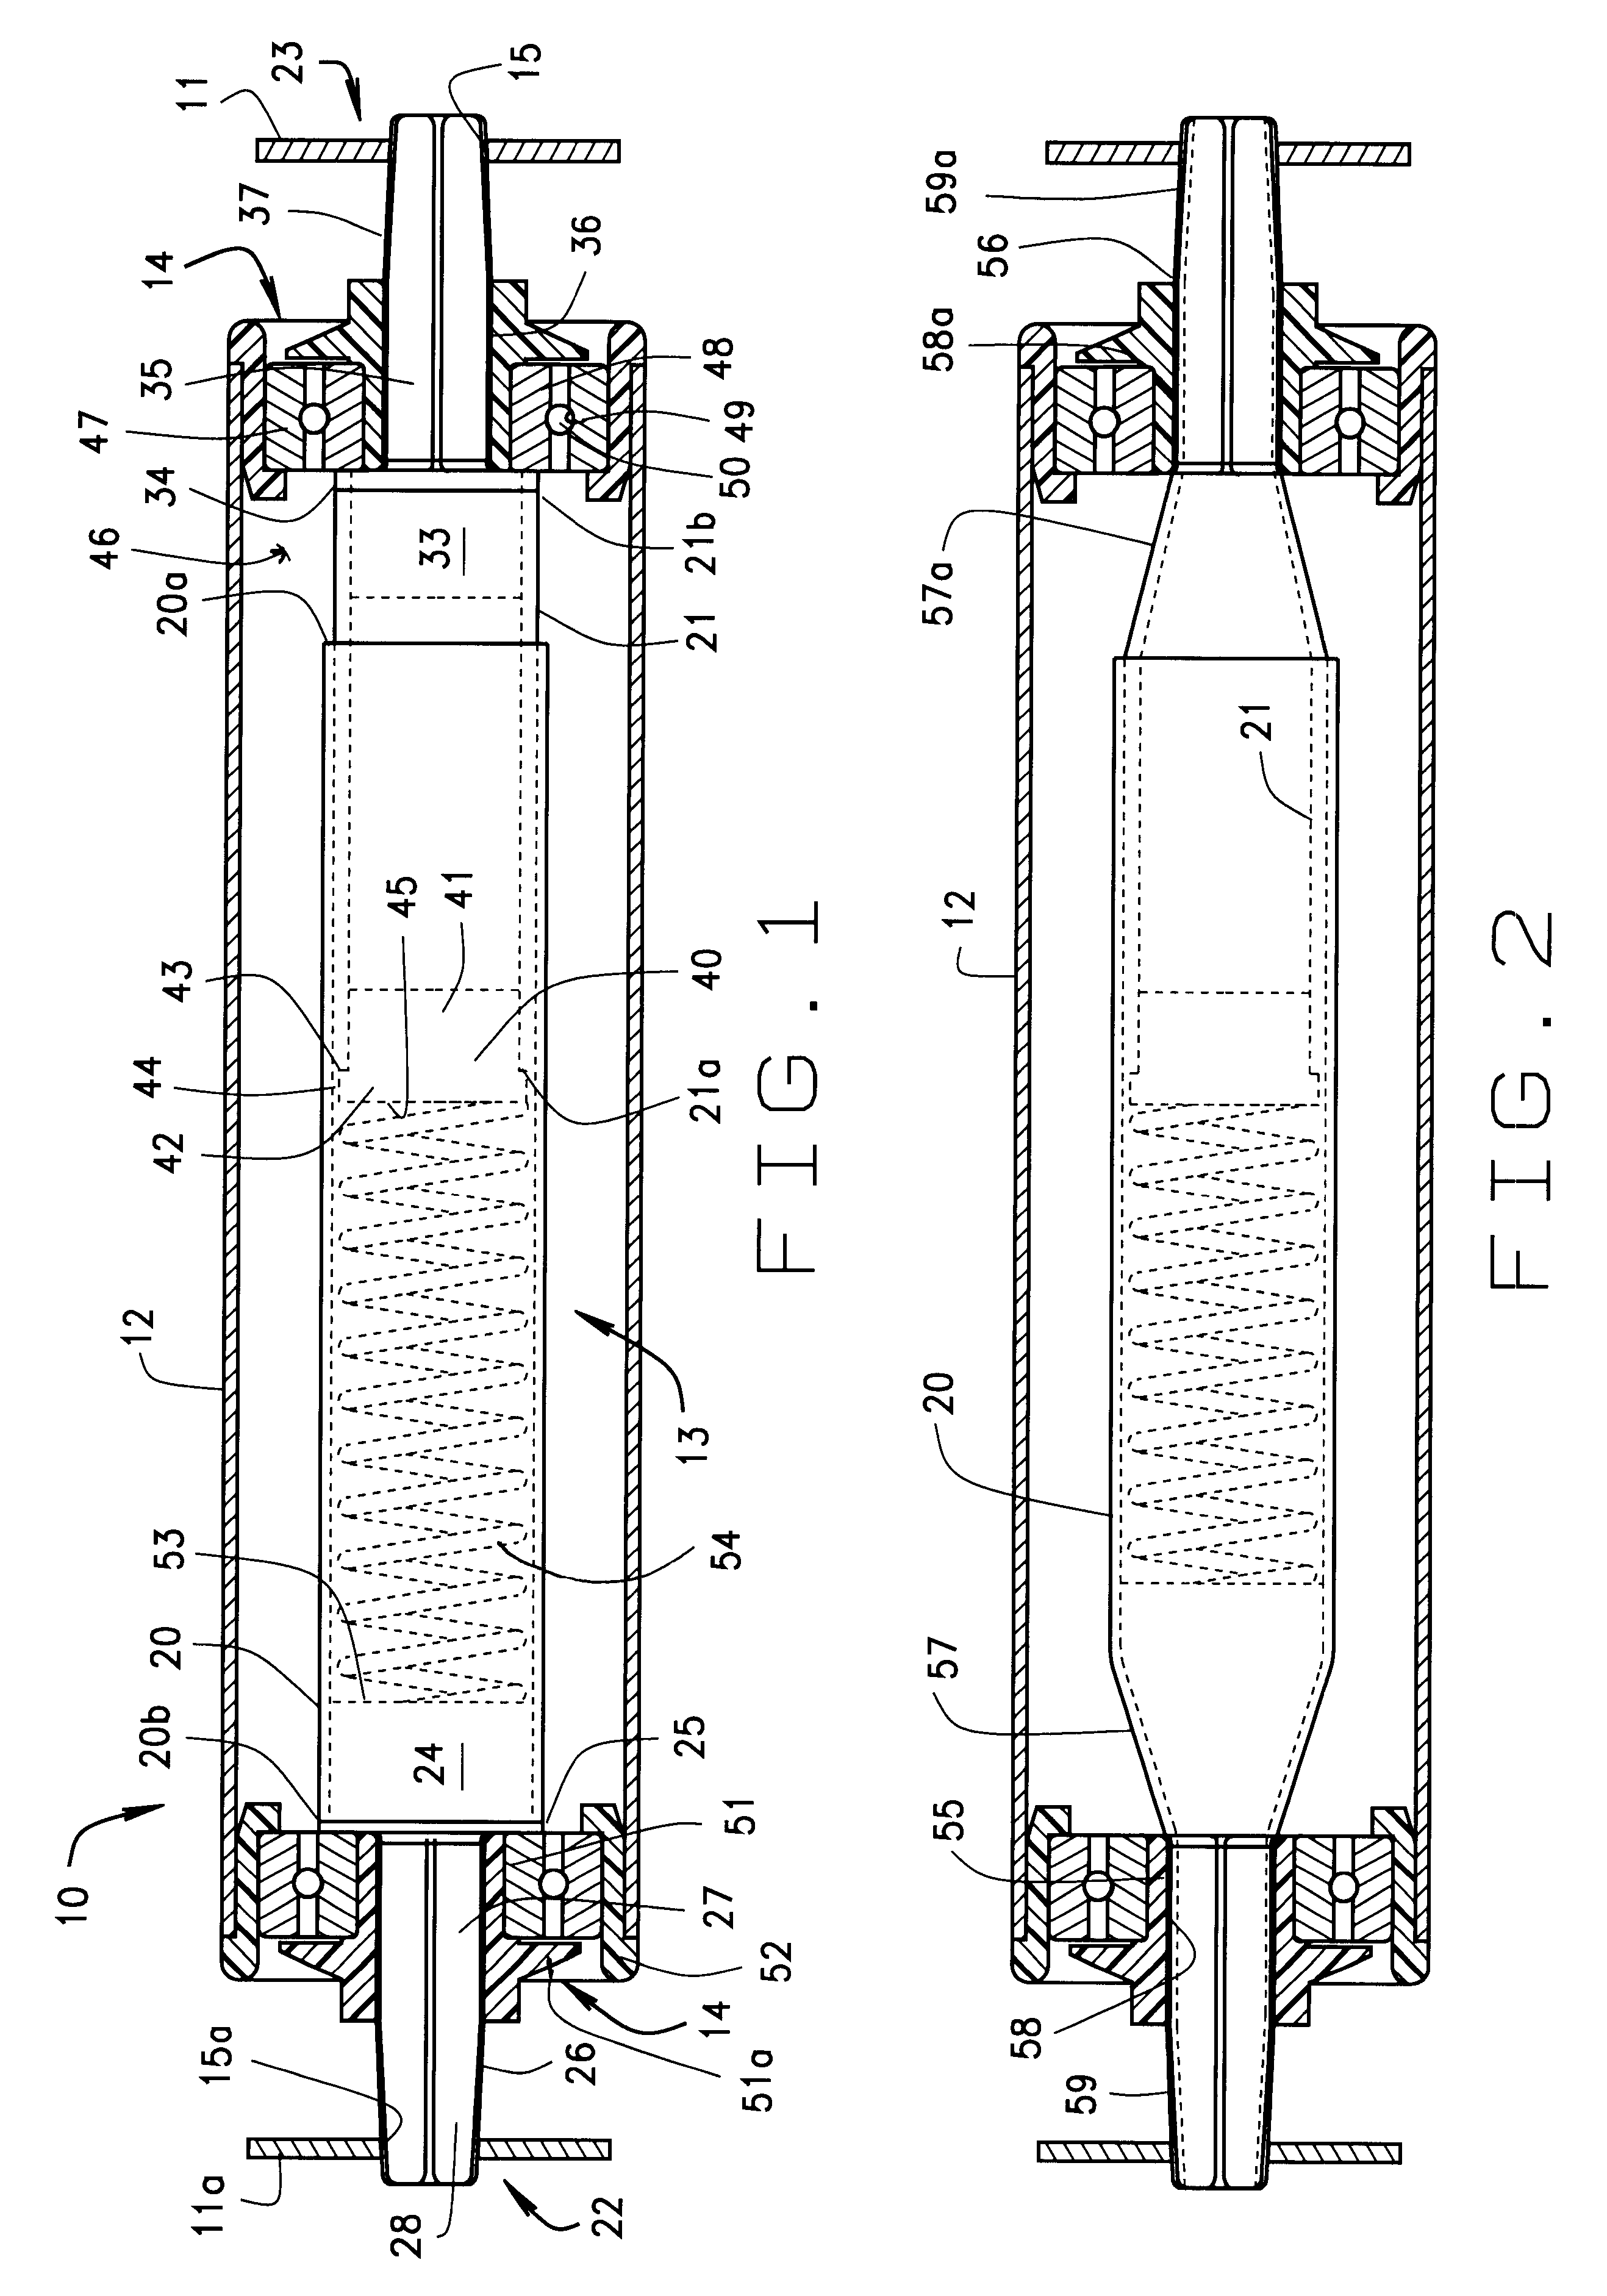 Conveyor roller with telescoping axle having tapered ends